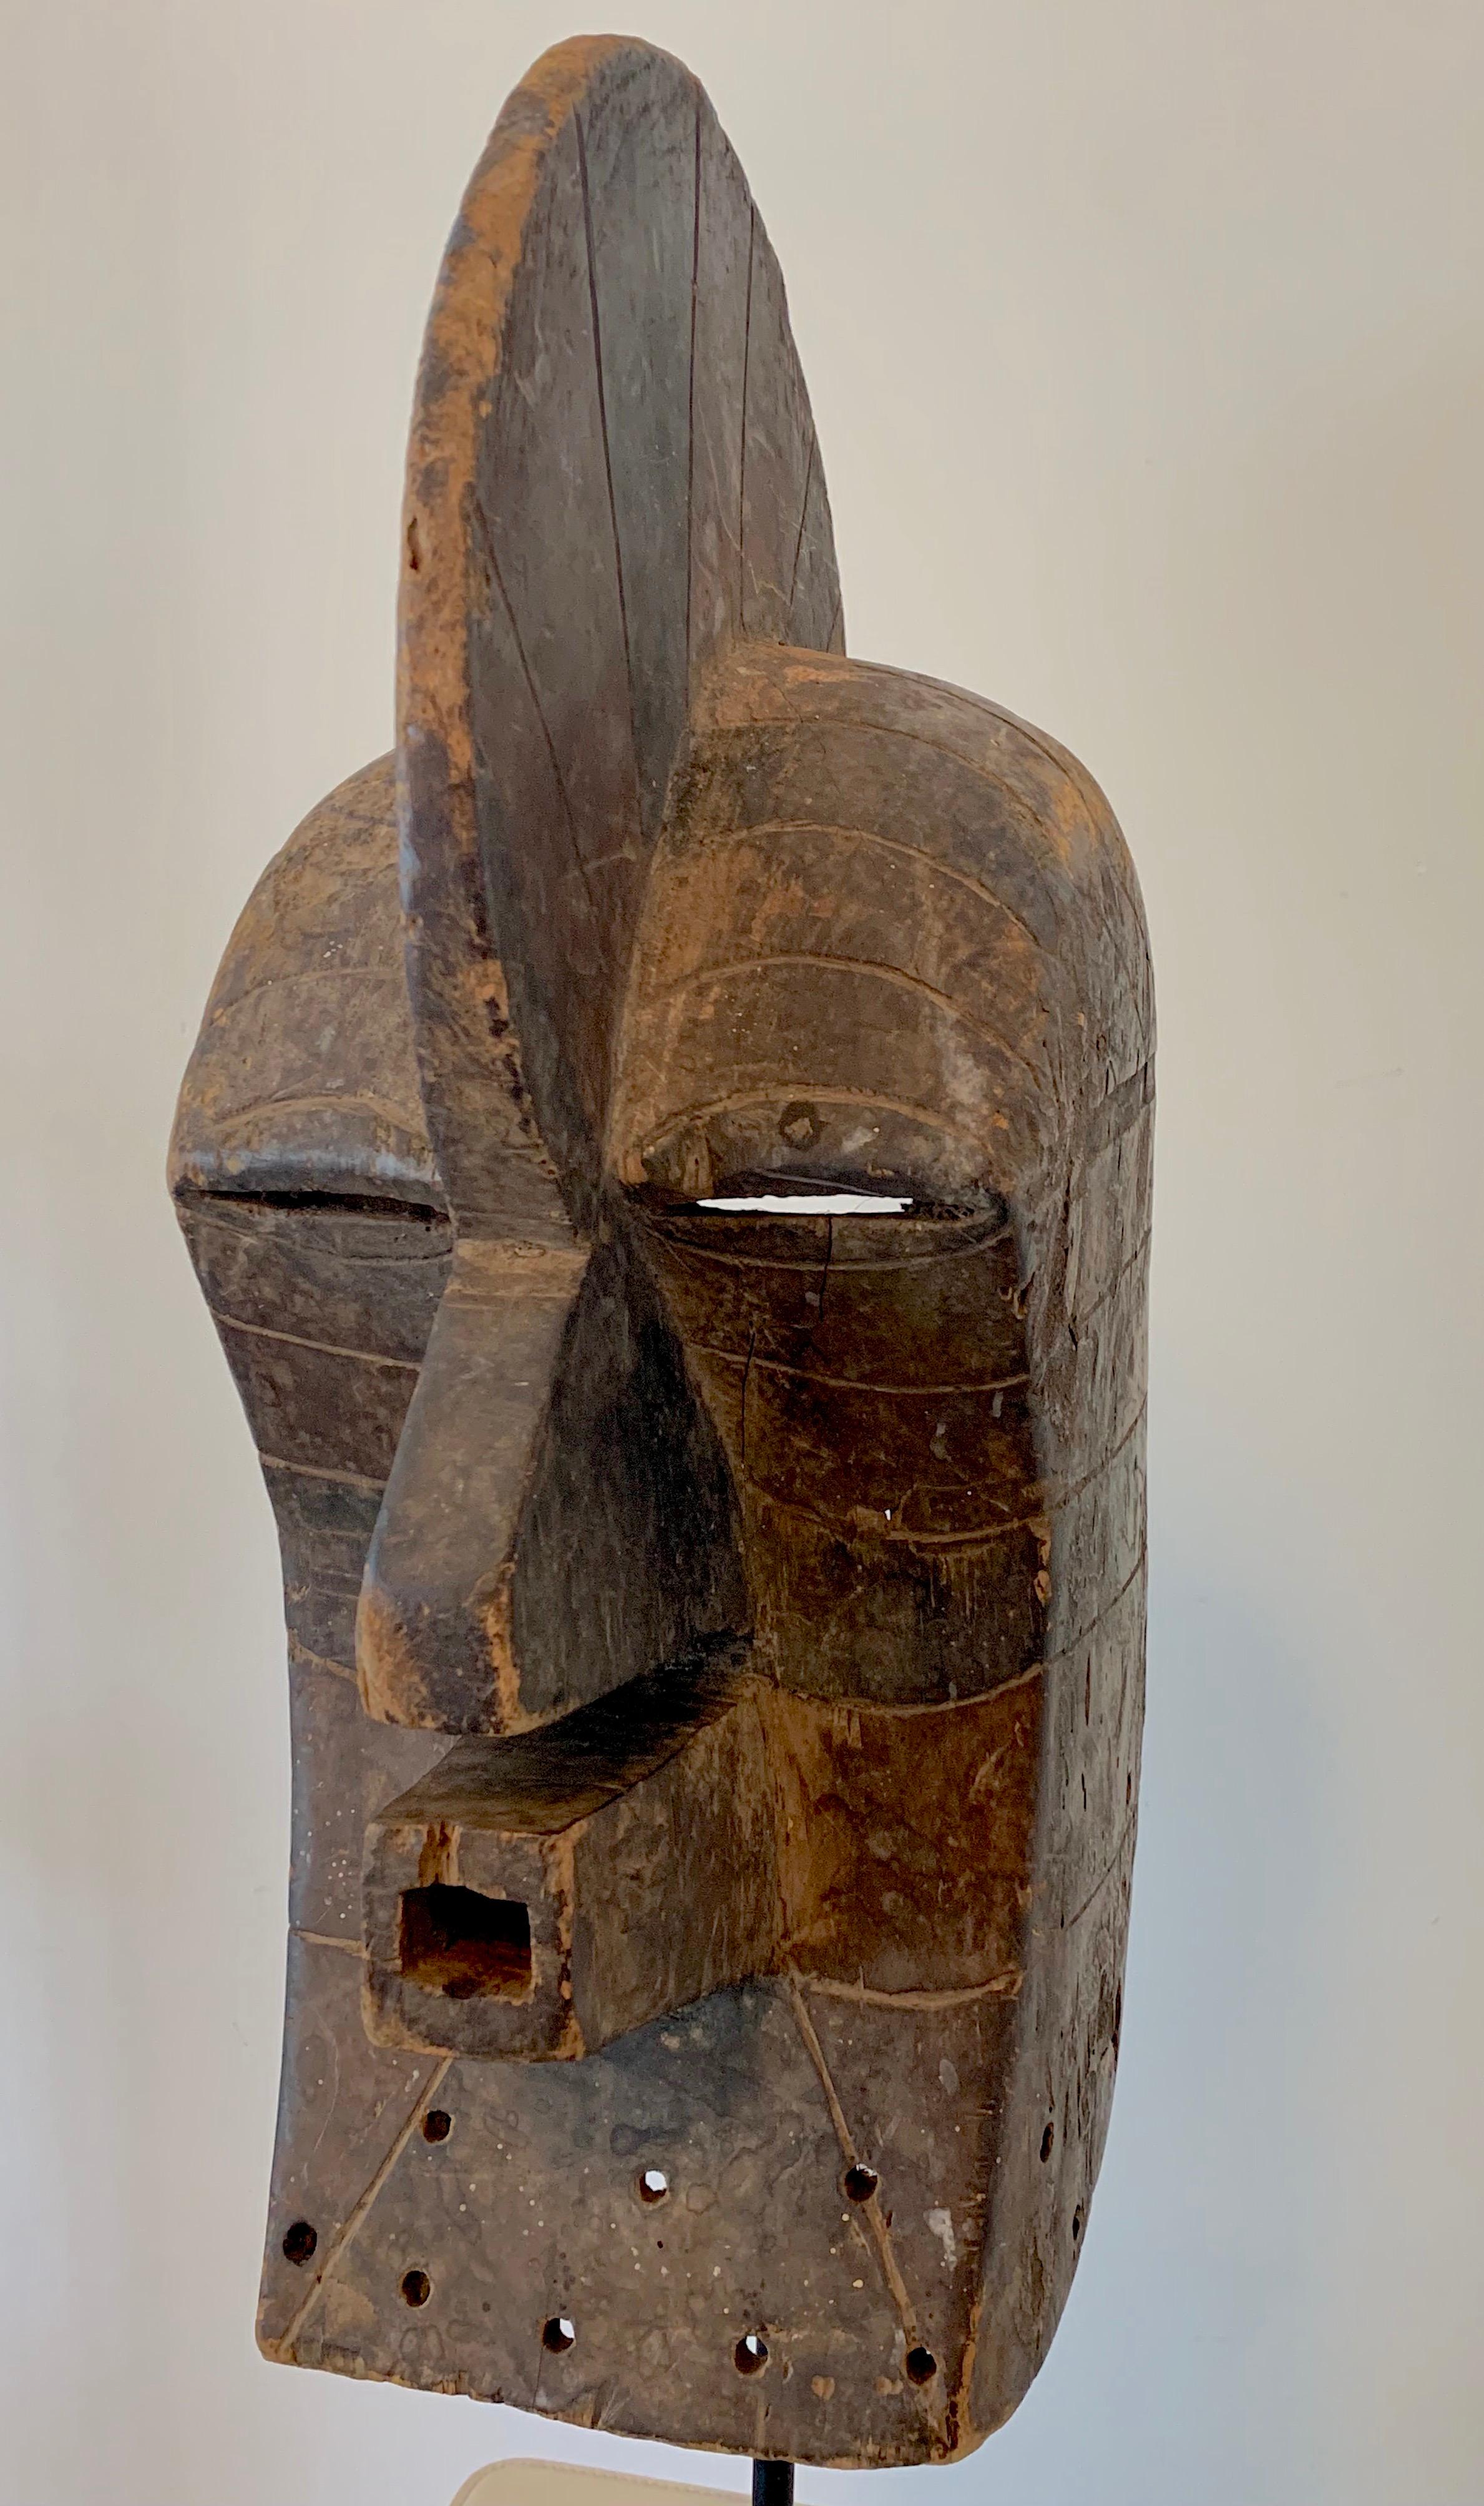 One of a kind early 19th century African hand carved Dogon wooden mask from Mali was worn during the dances performed by tribe. Custom museum iron support stand is included.

Actual mask measurements:
21 inches high
8 inches wide
11.5 inches deep.